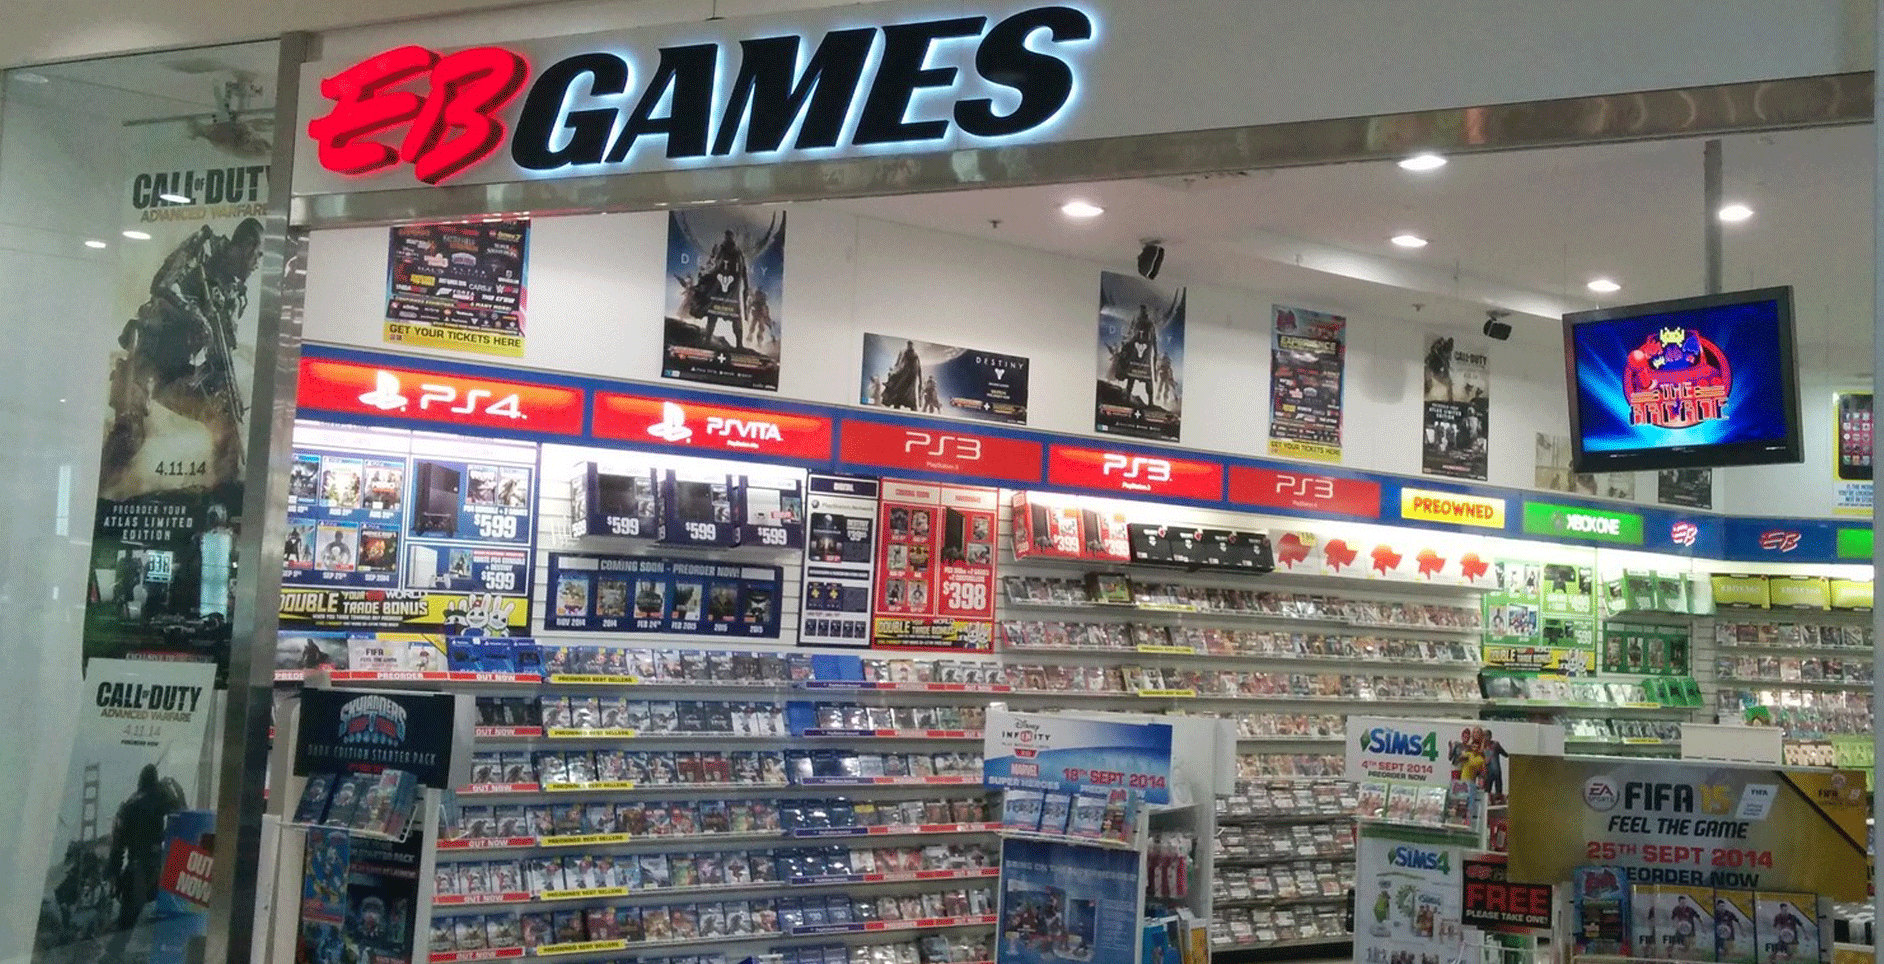 game pre owned games